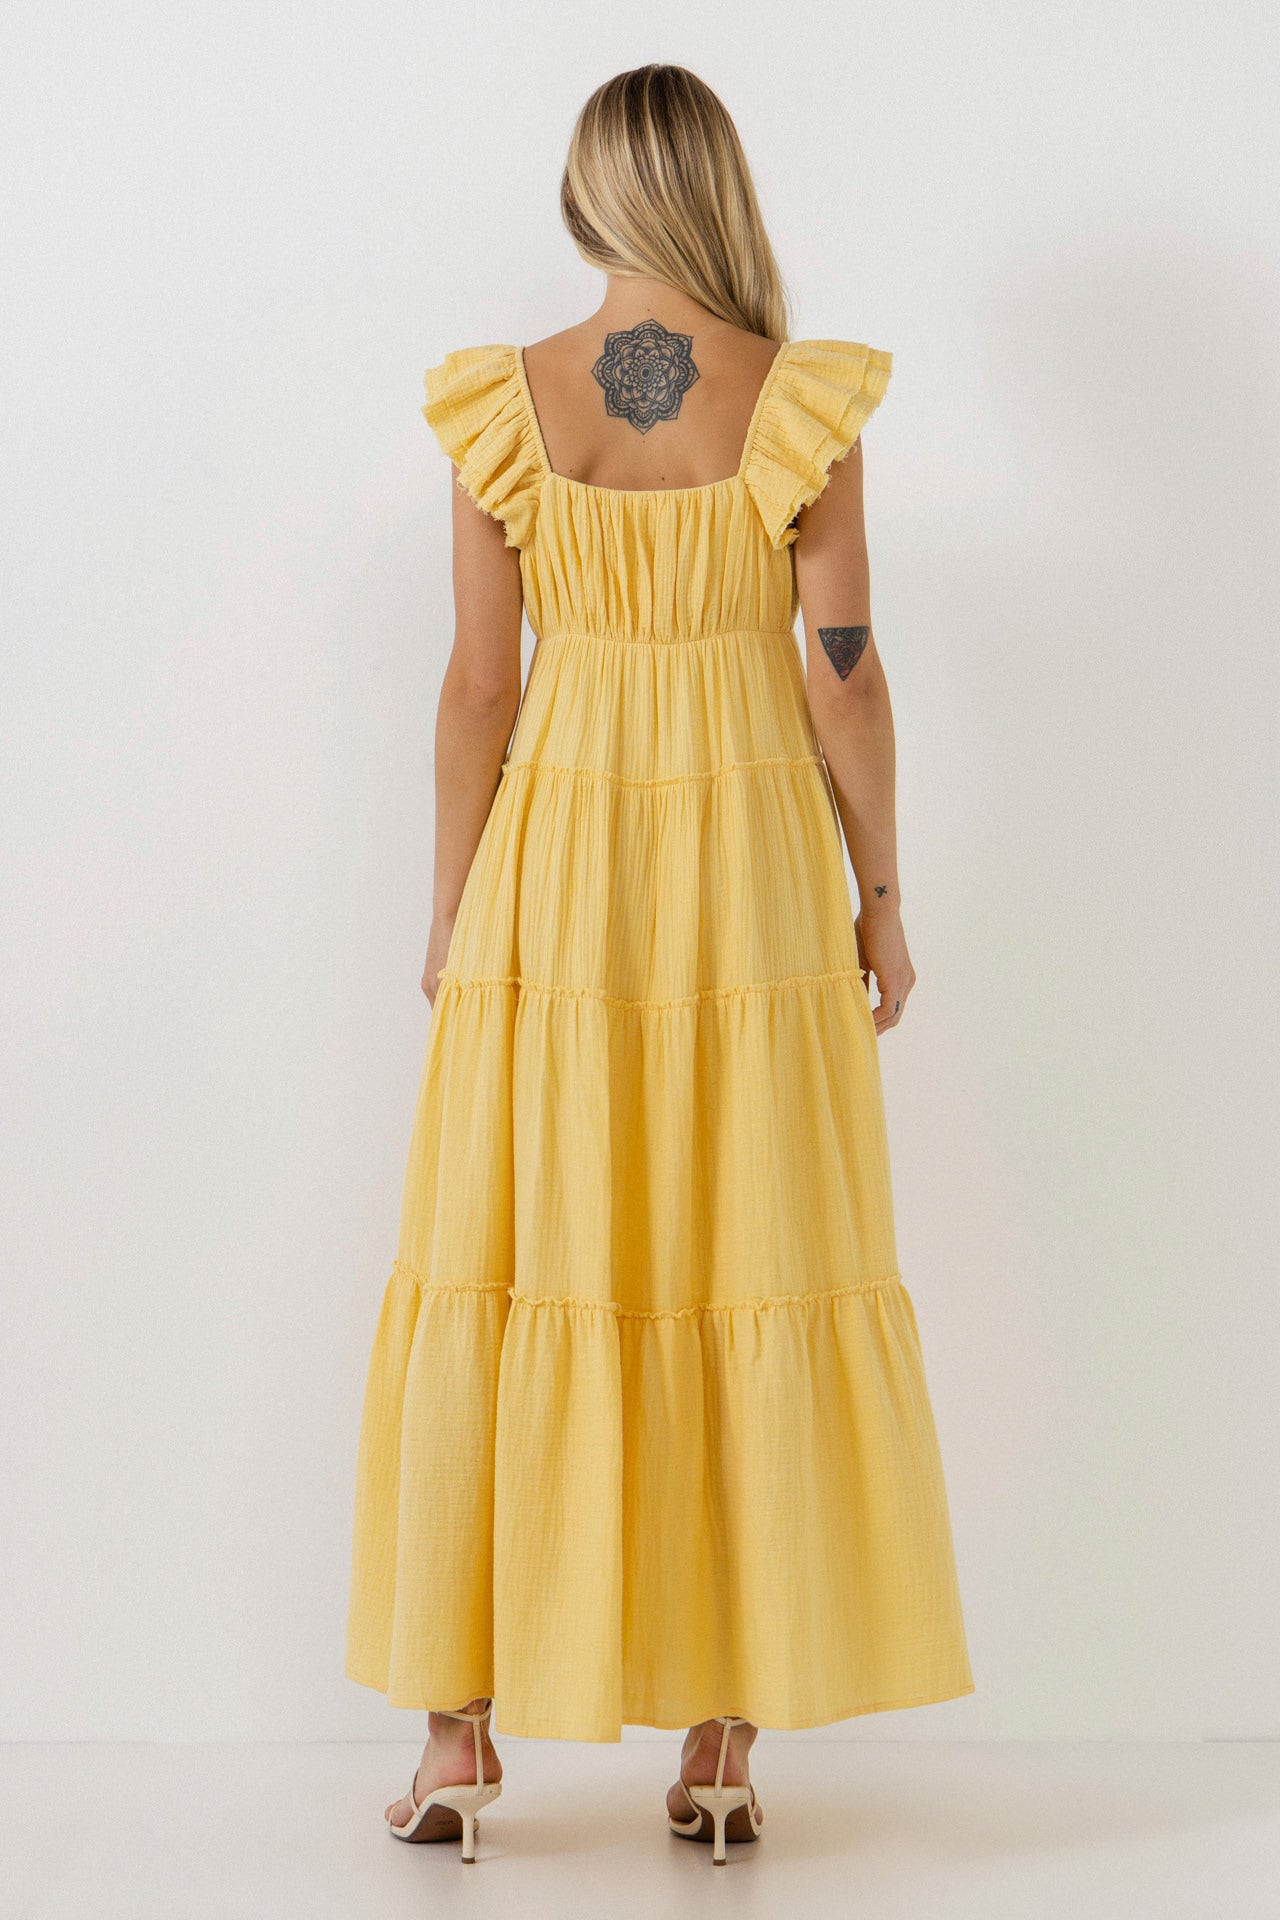 FREE THE ROSES - Maxi Sweetheart Dress With Raw Edge Details - DRESSES available at Objectrare